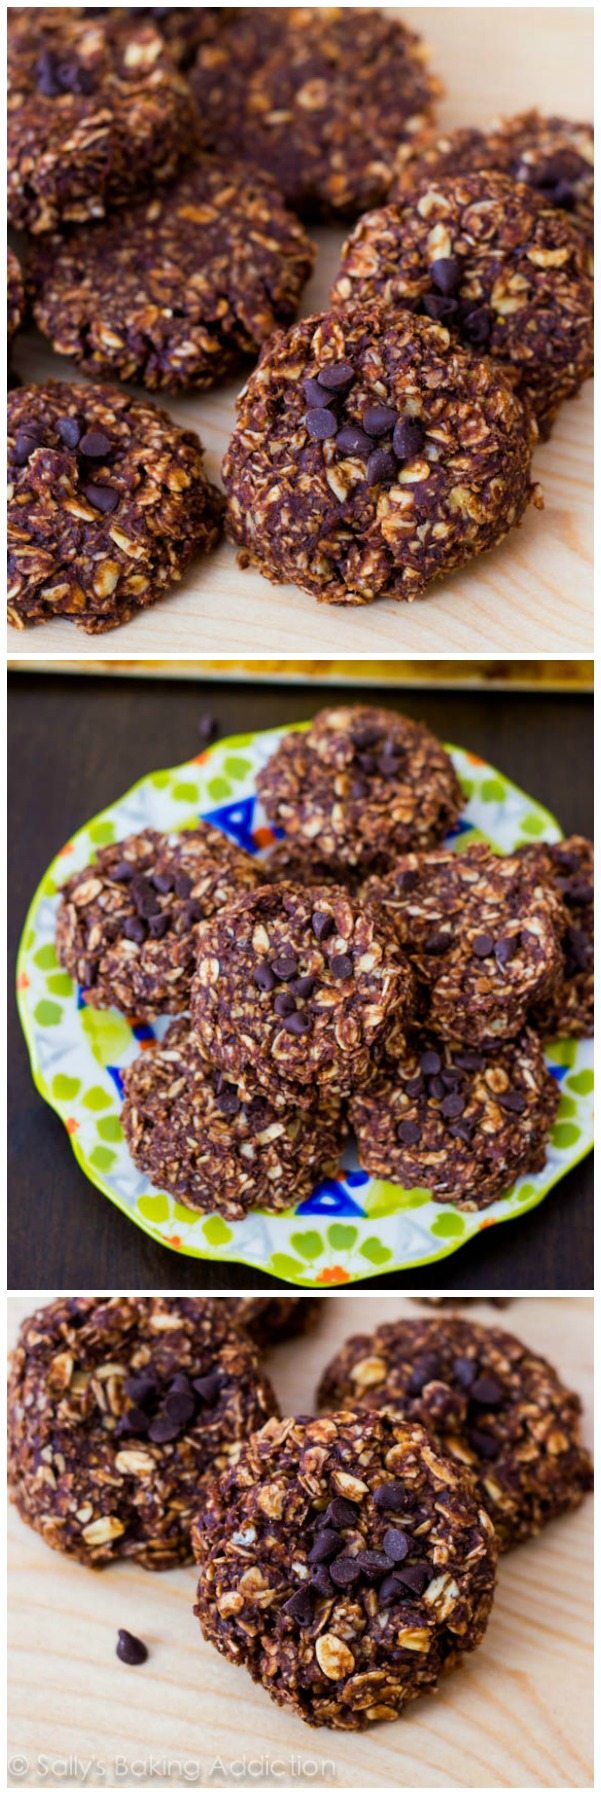 3 images of chocolate peanut butter no-bake cookies